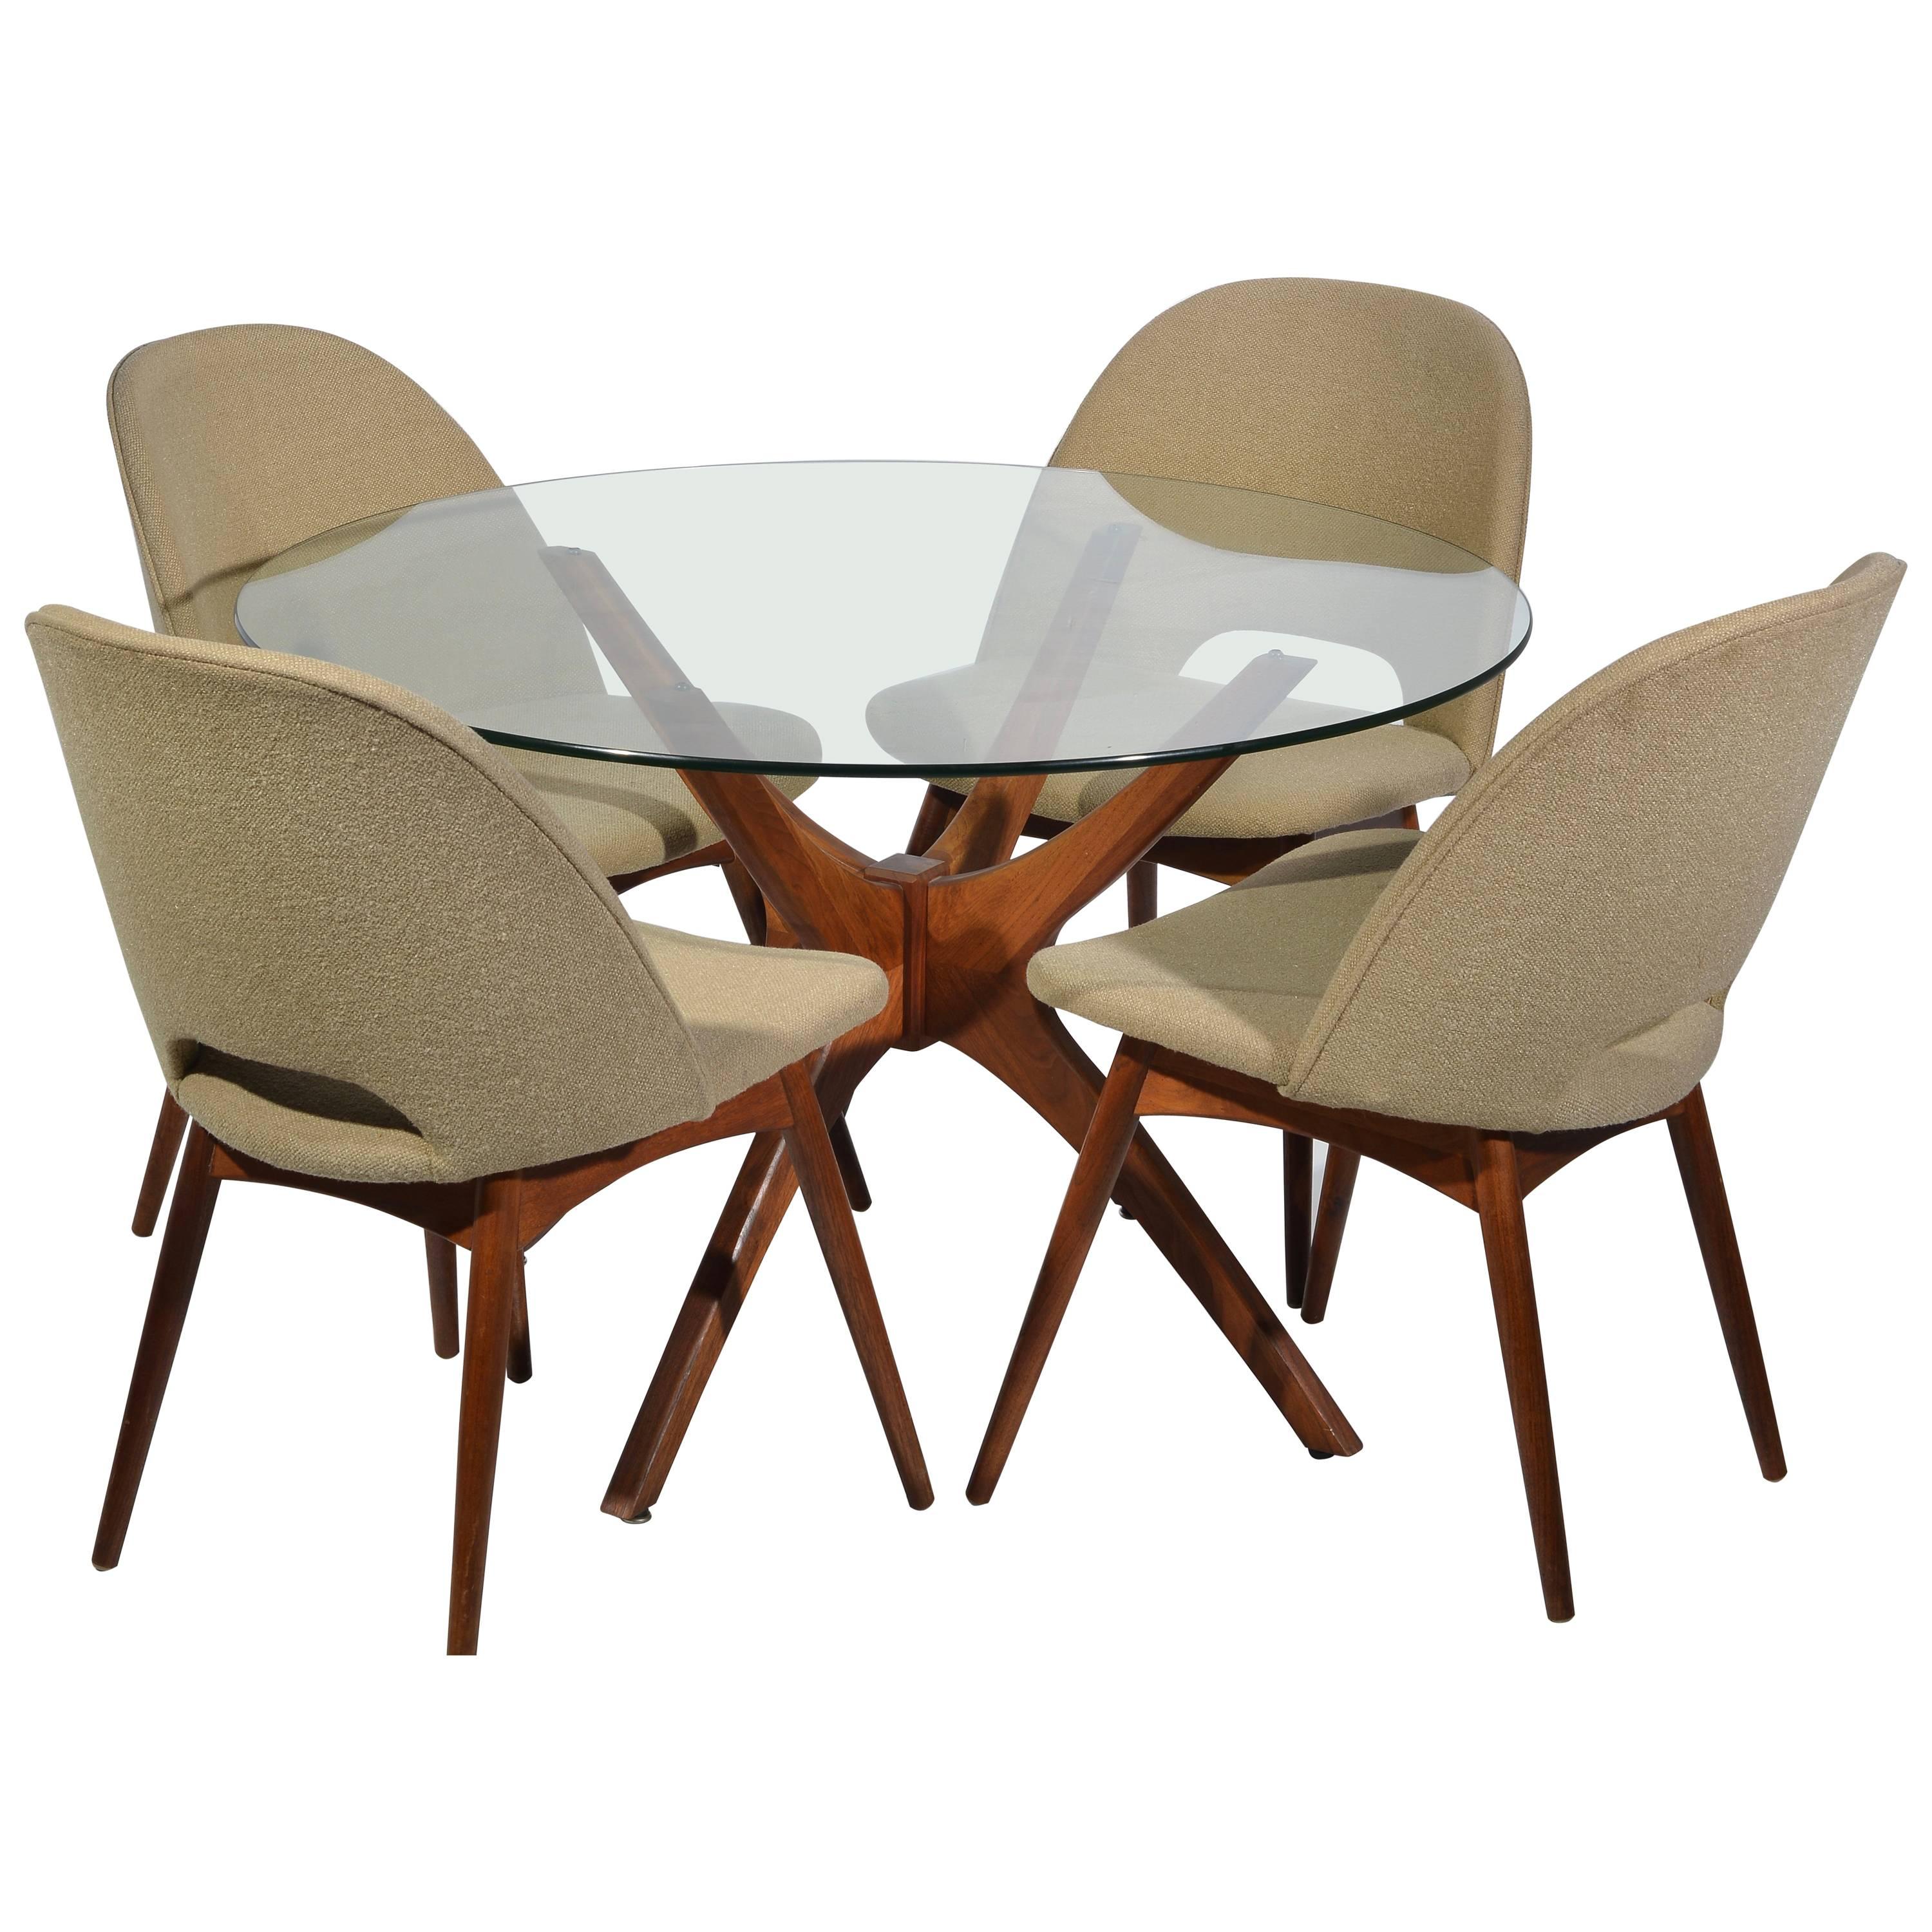 Adrian Pearsall walnut dining chairs for the Jacks series. Original upholstery, table sold. 
 